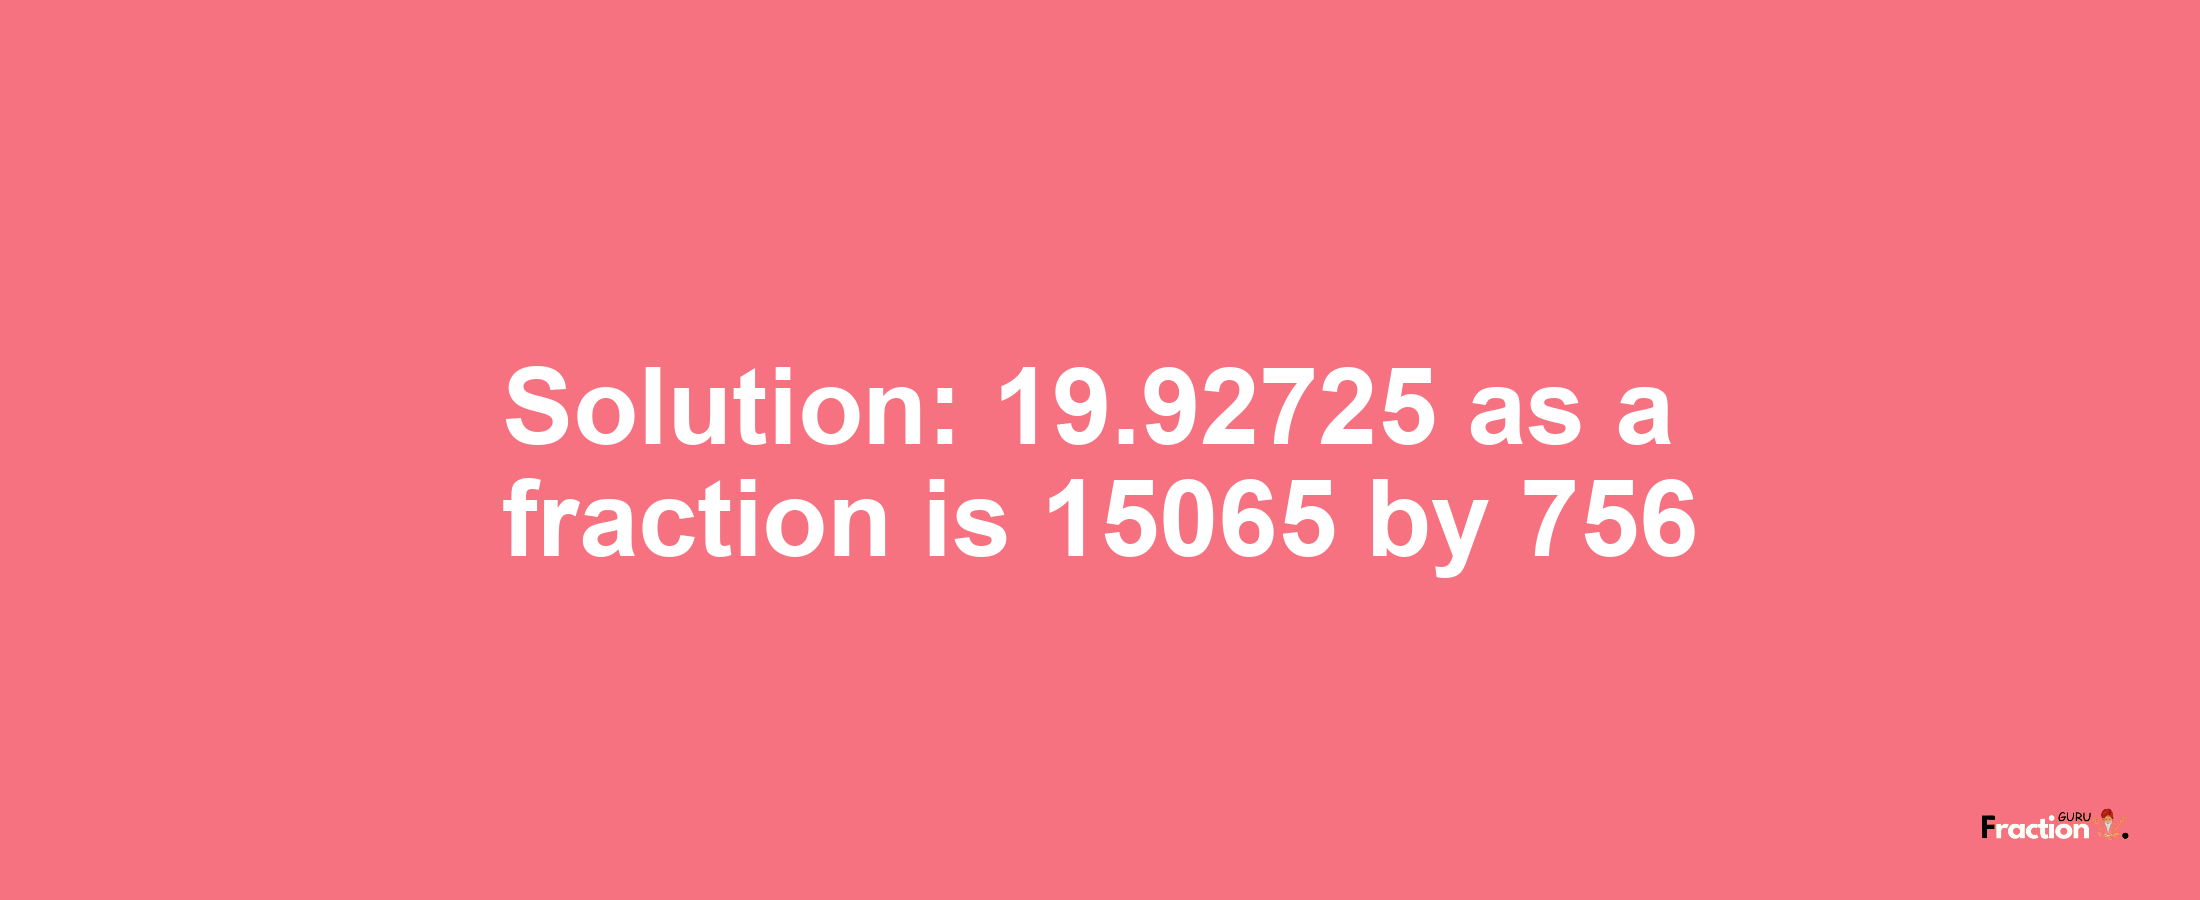 Solution:19.92725 as a fraction is 15065/756